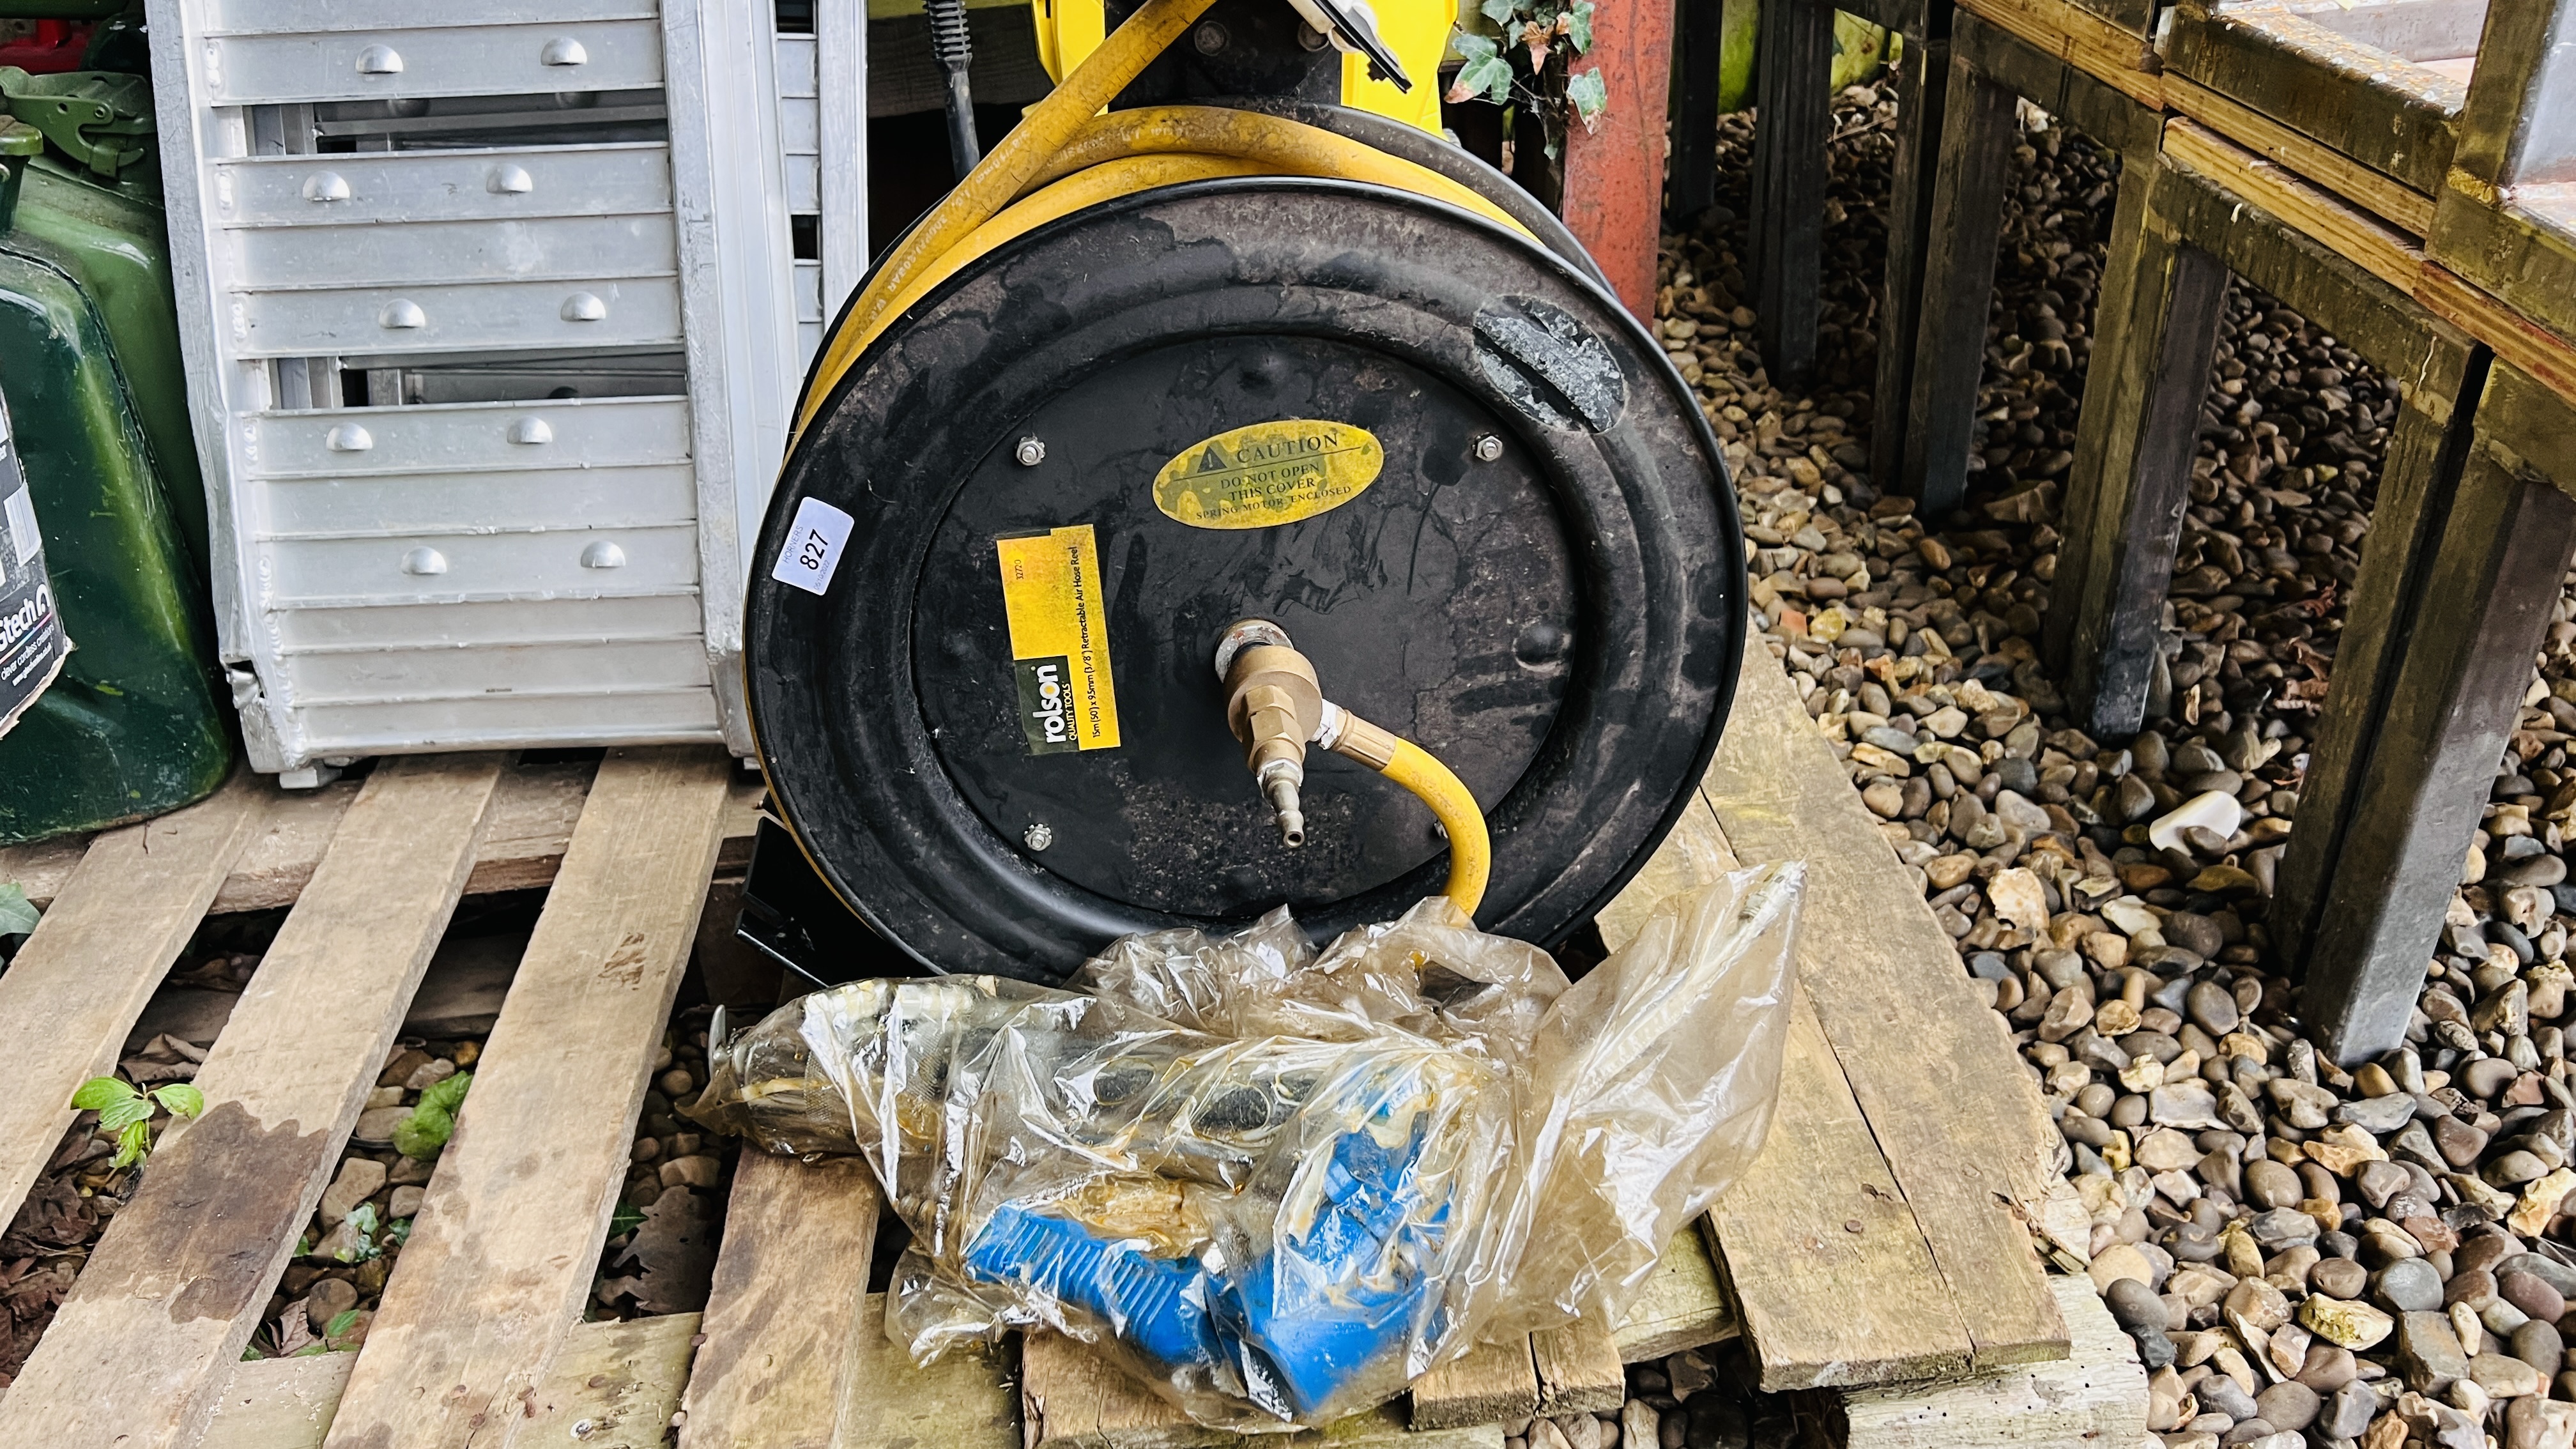 ROLSON 15 METER RETRACTABLE AIR HOSE REEL AS CLEARED ALONG WITH GREASE GUN